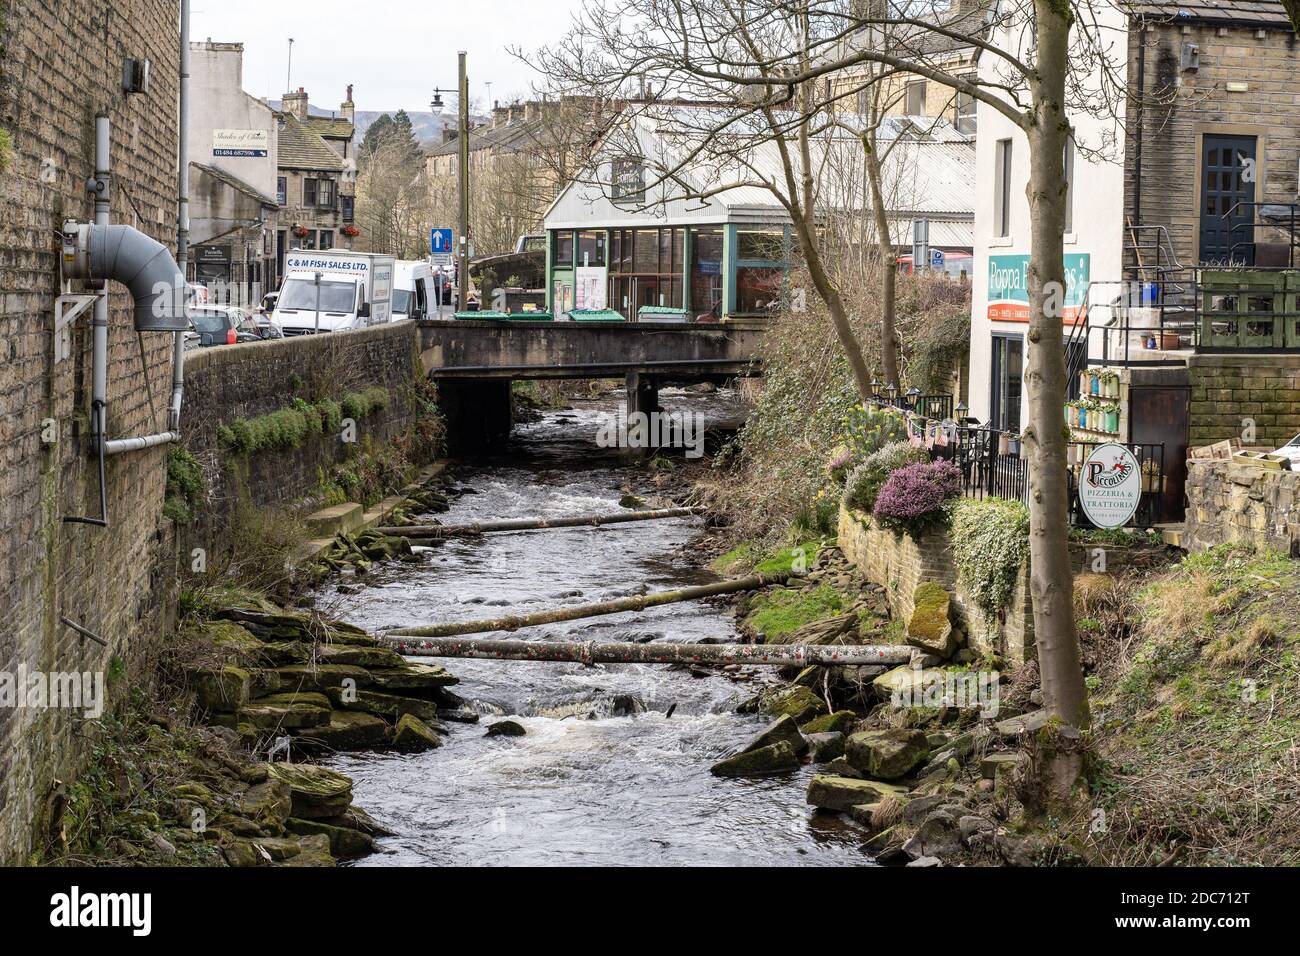 the river holme at holmfirth showing the market hall and exposed drain pipes Stock Photo